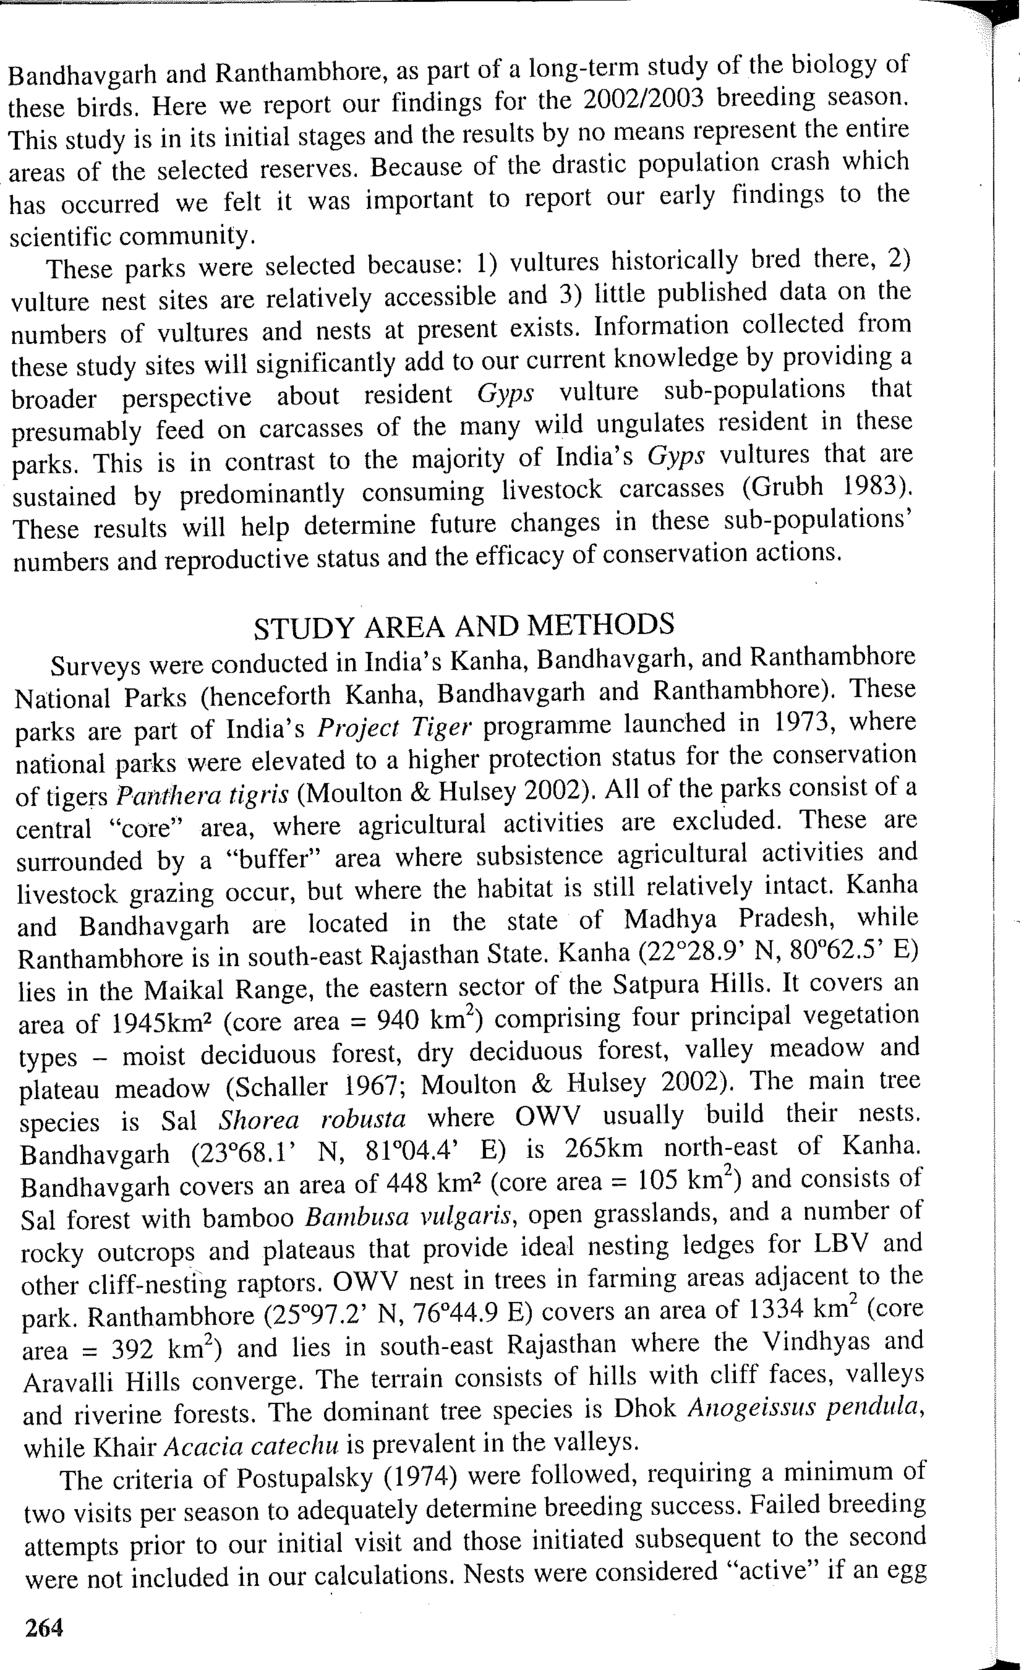 Bandhavgarh and Ranthambhore, as part of a long-term study of the biology of these birds. Here we report our findings for the 2002/2003 breeding season.